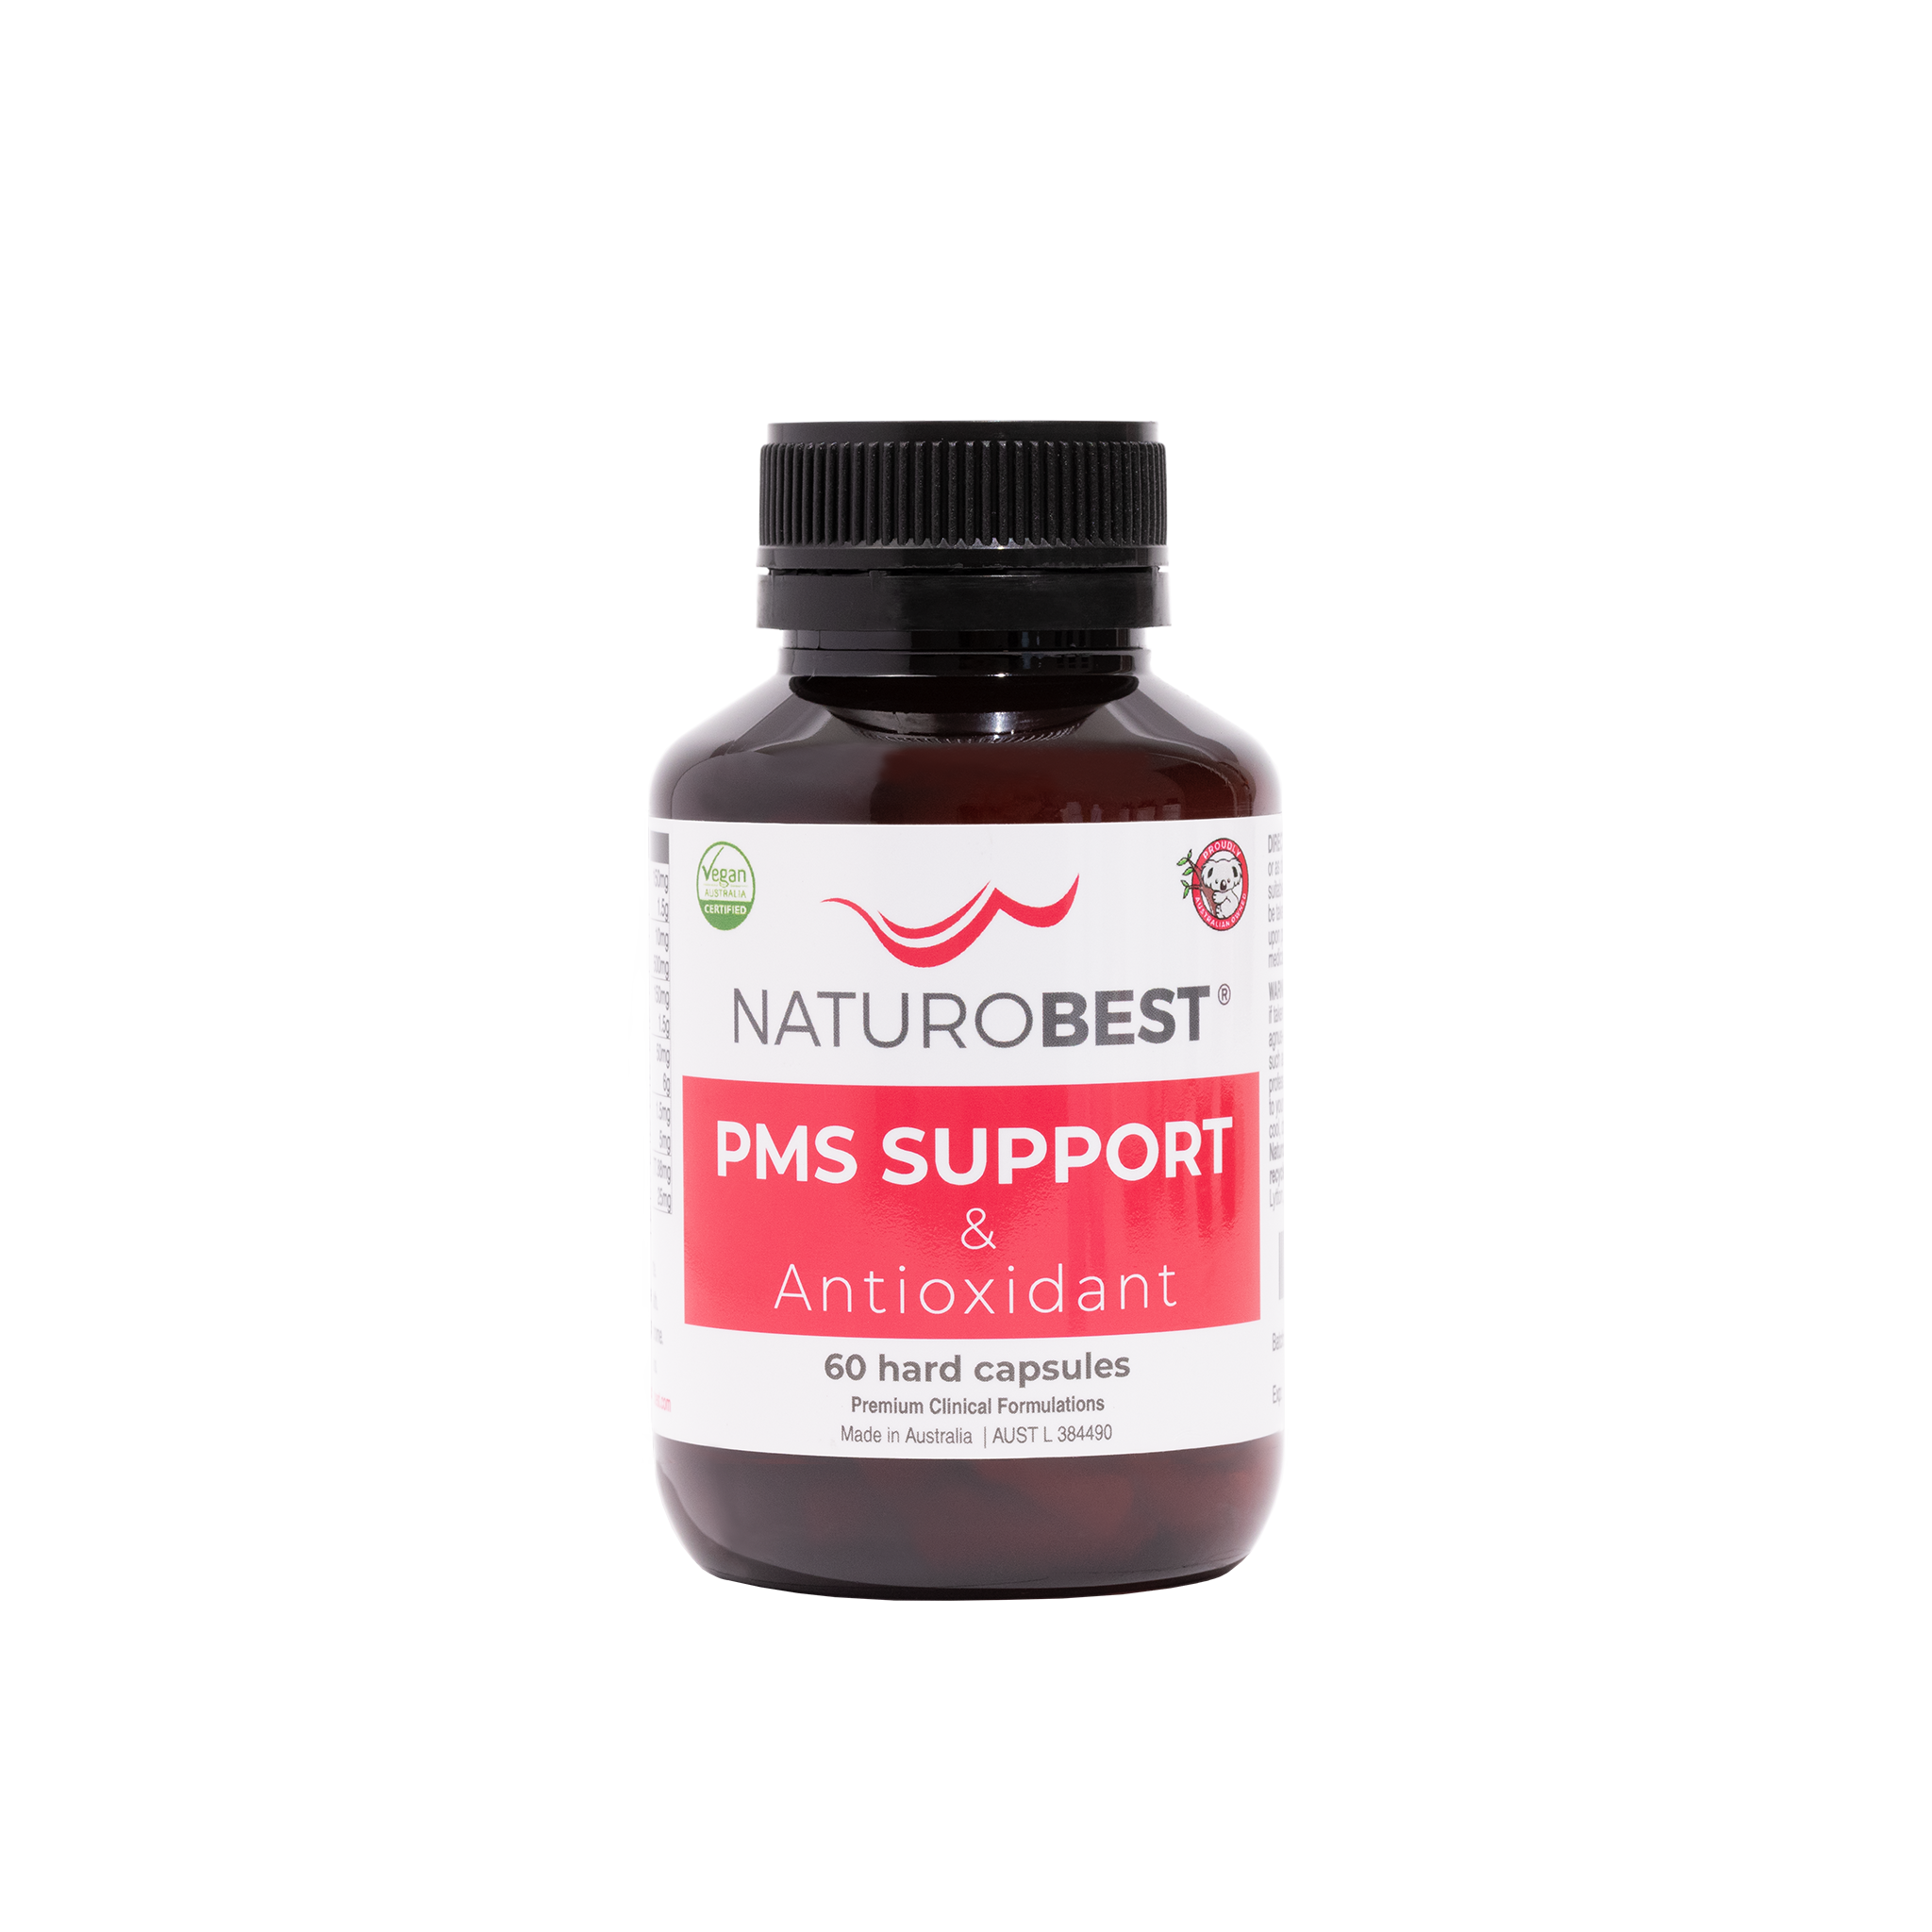 PMS Support & Antioxidant 6-Pack | Buy 5, Get 1 Free!